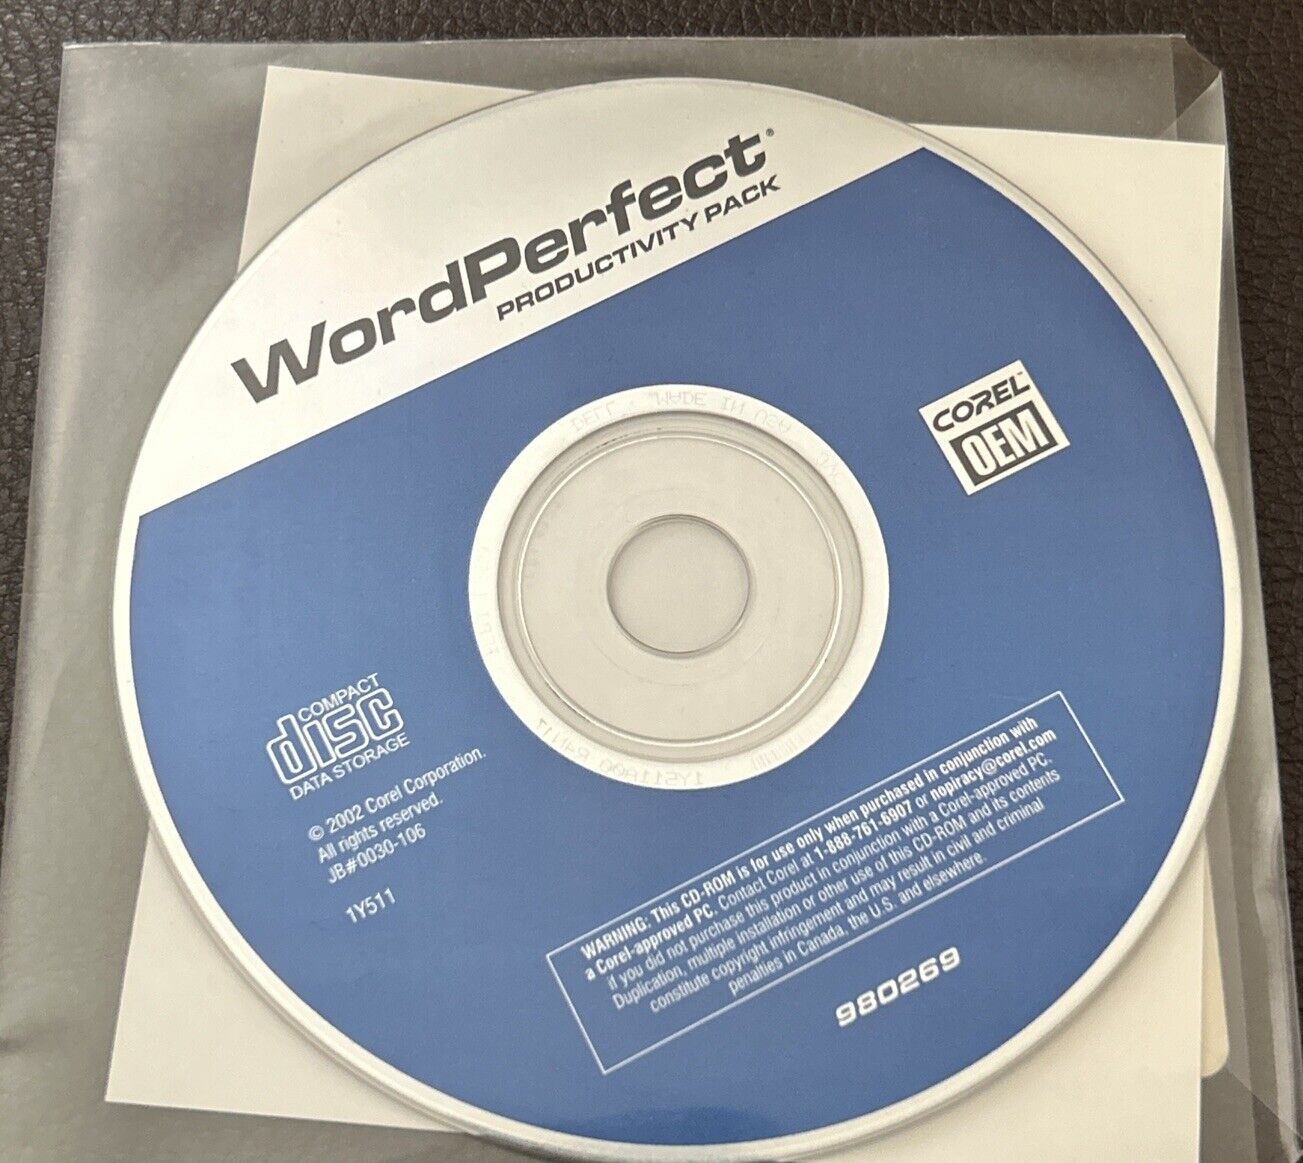 Corel WordPerfect Productivity Pack PC CD Disc 2002 New Unopened